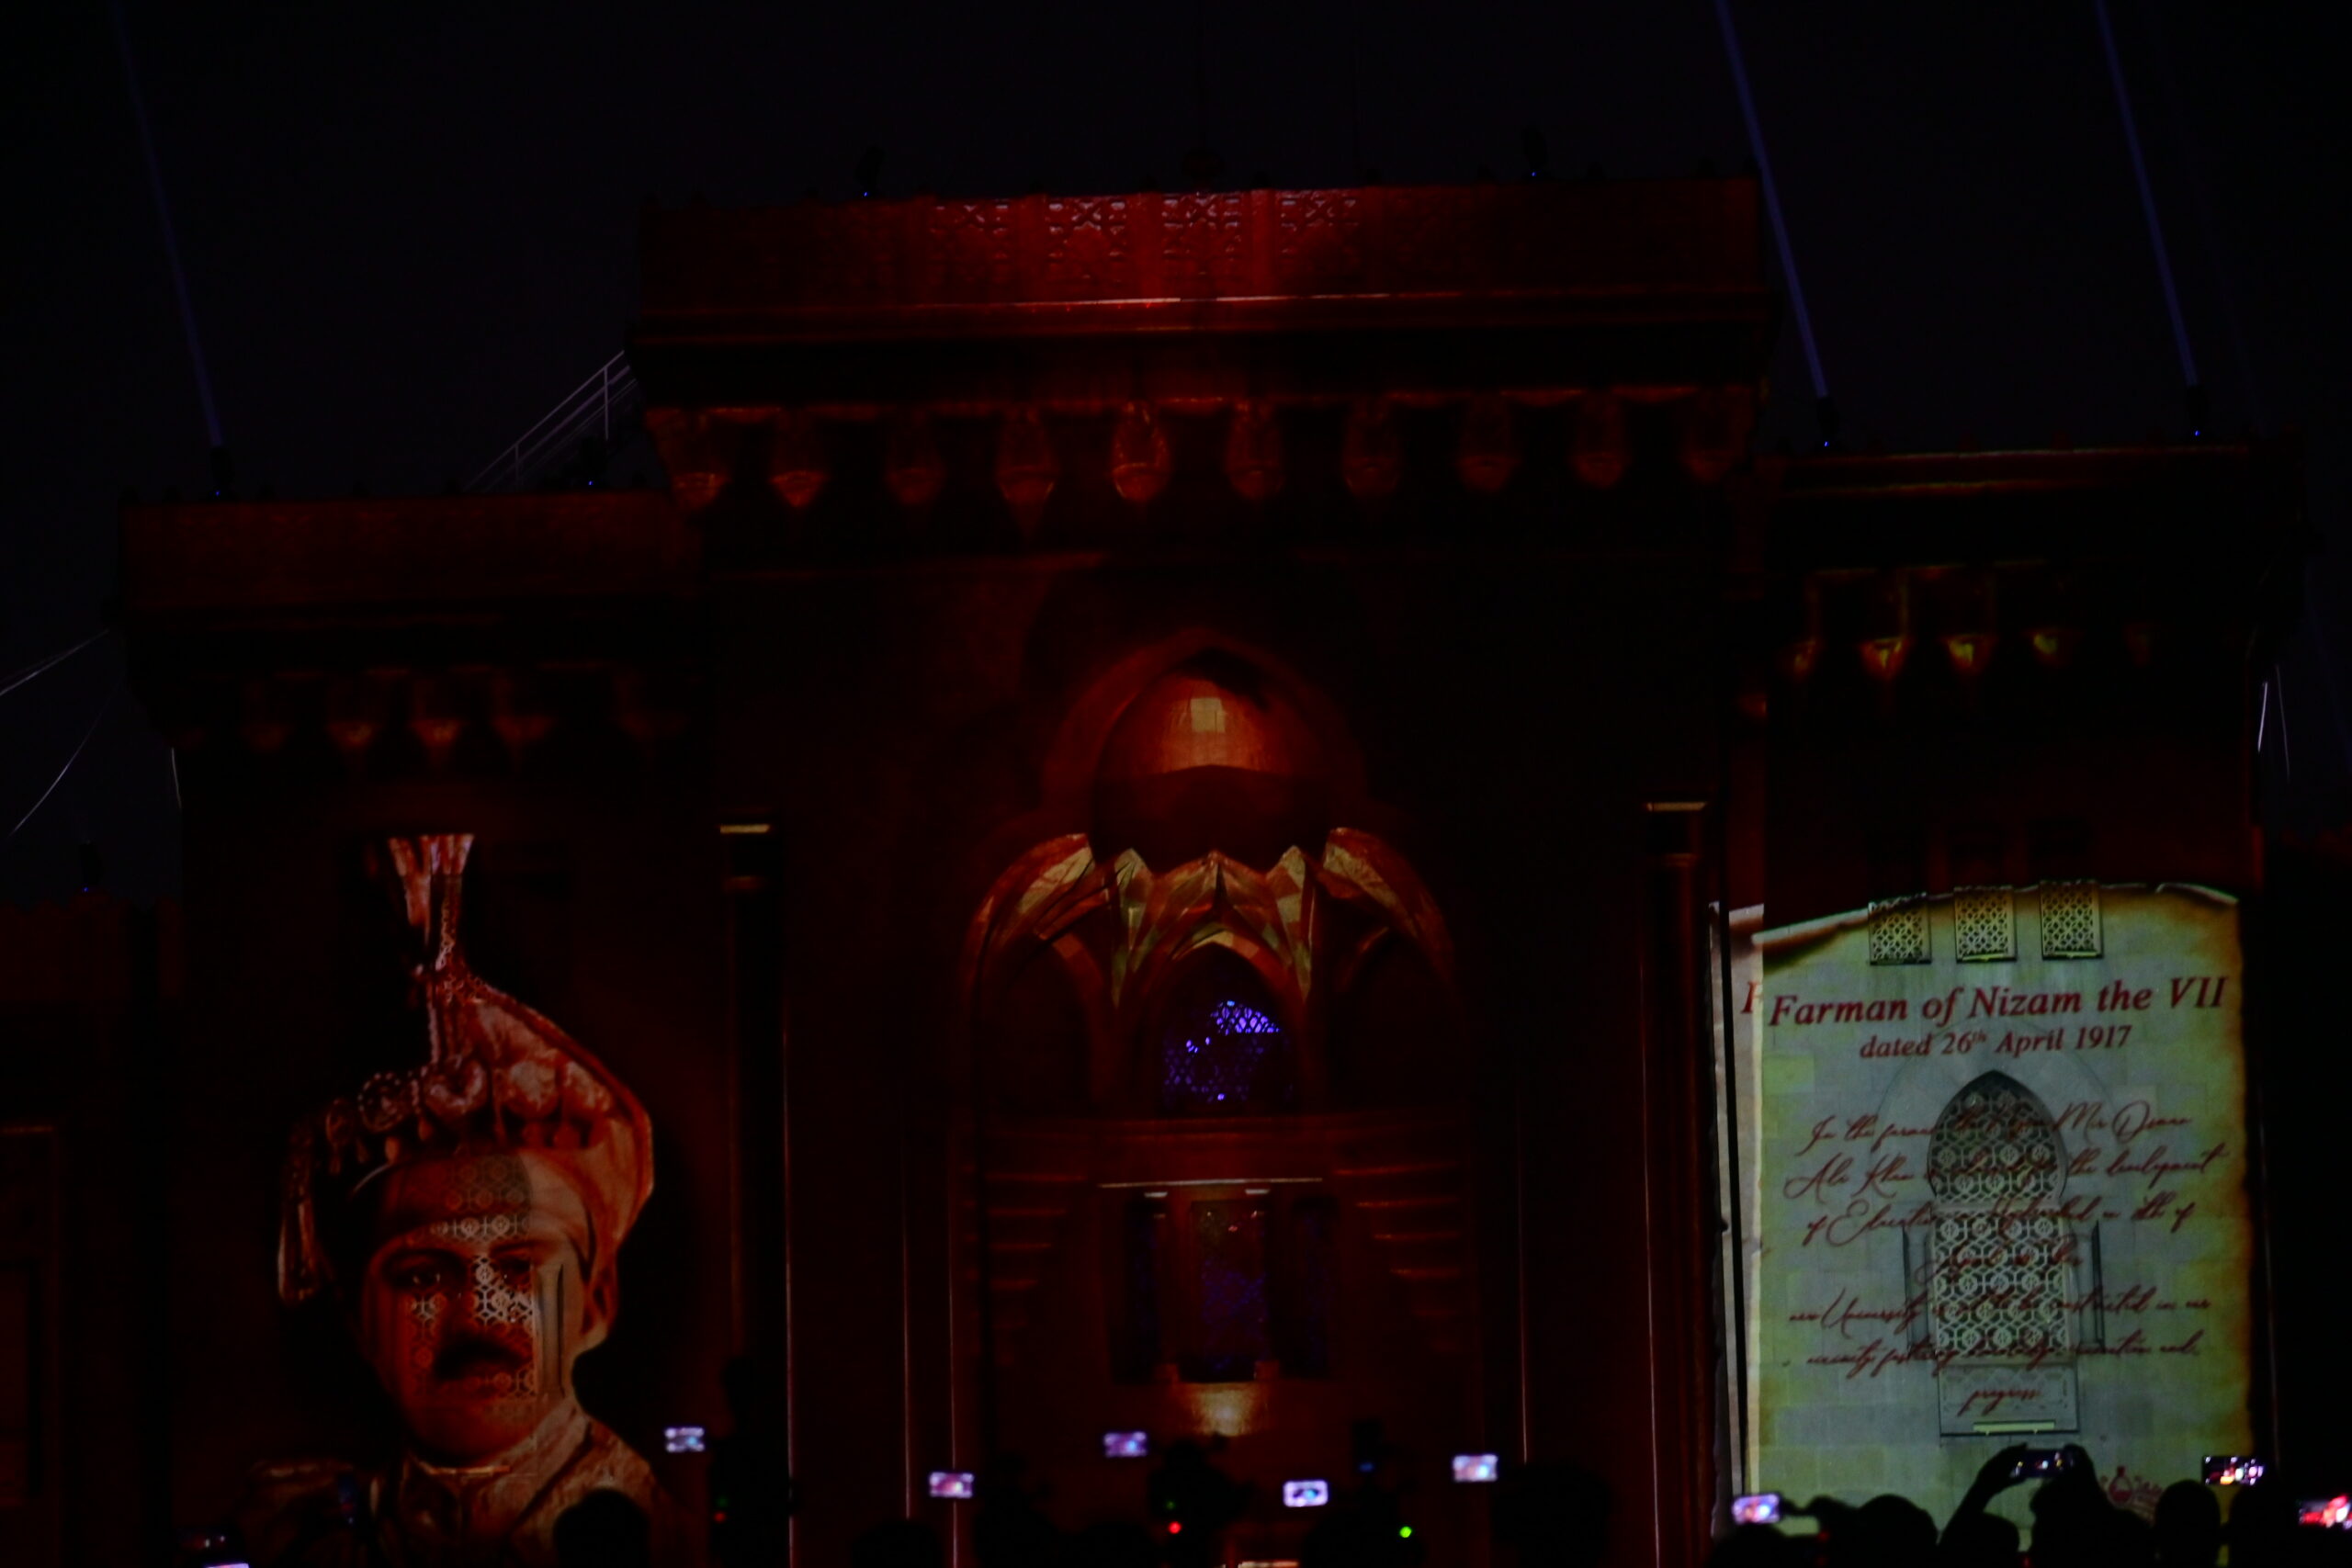 Dynamic Laser Show At Arts College In Osmania University (7)